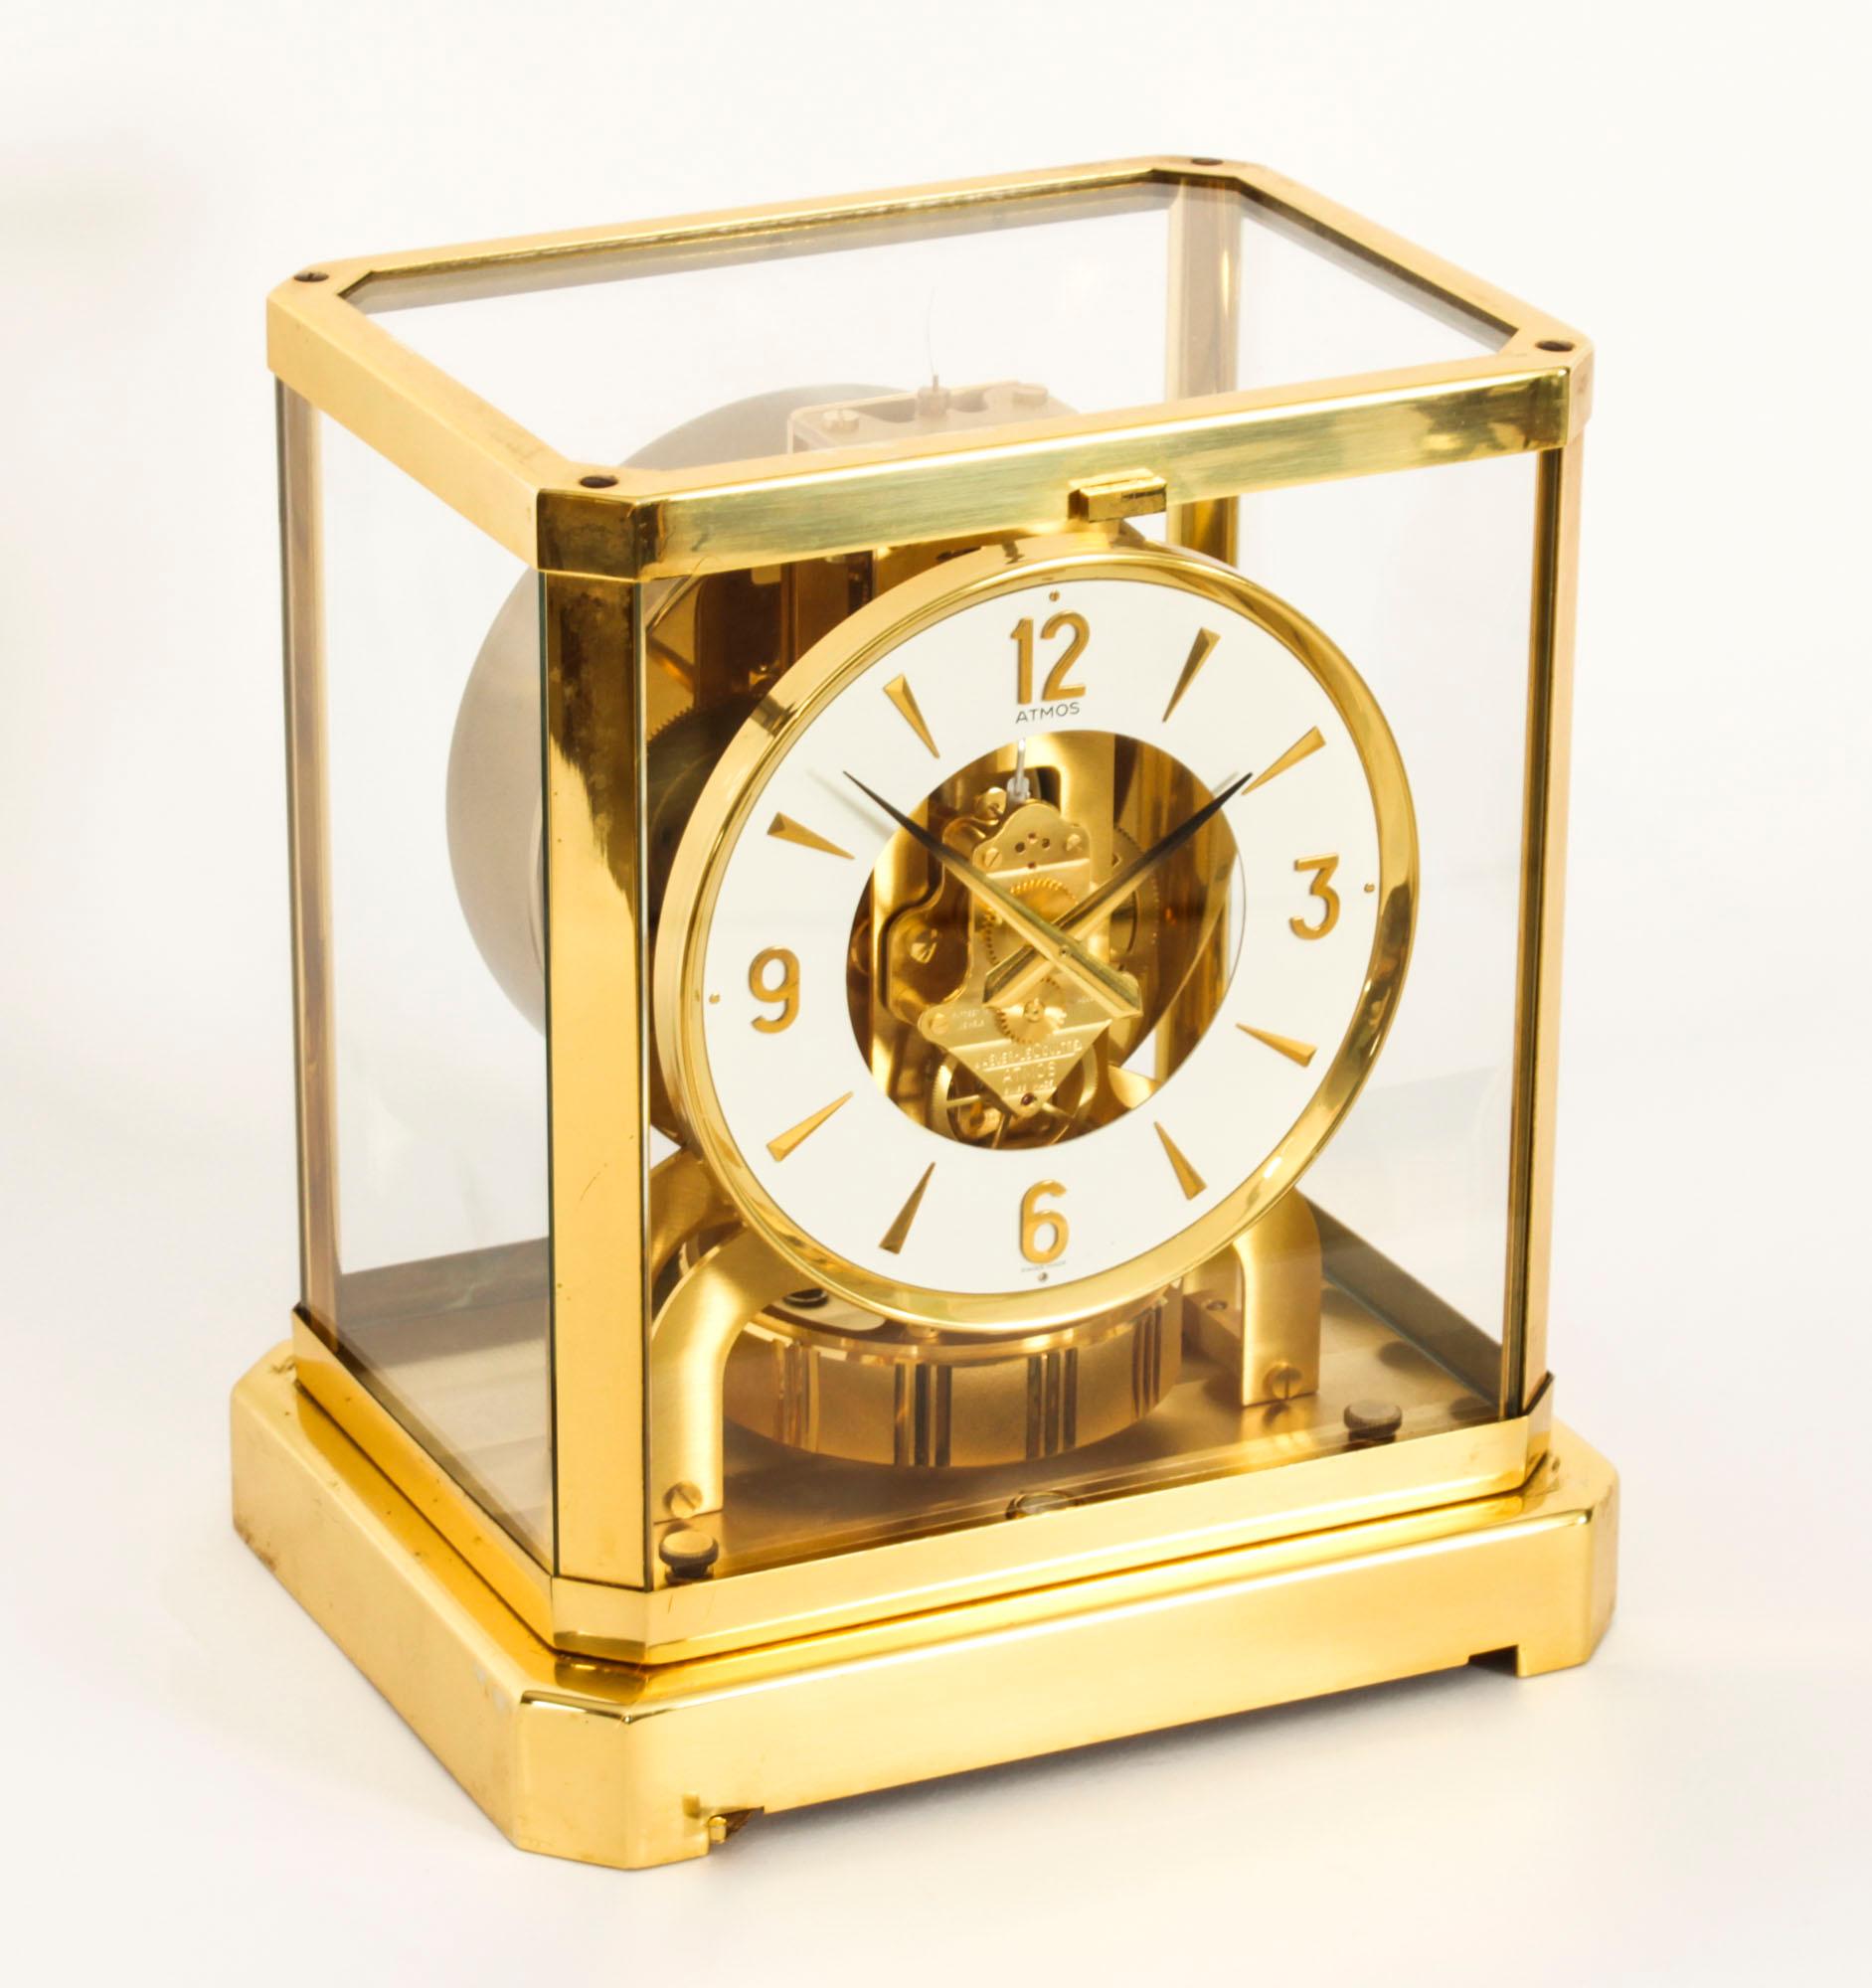 This is a very elegant Vintage Atmos perpetual mantle clock by Jaeger-LeCoultre, with a jewelled movement bearing their ref  No. 464788 and dating from Circa 1970.

The clock is displayed in a polished gilt rectangular brass case with canted corners